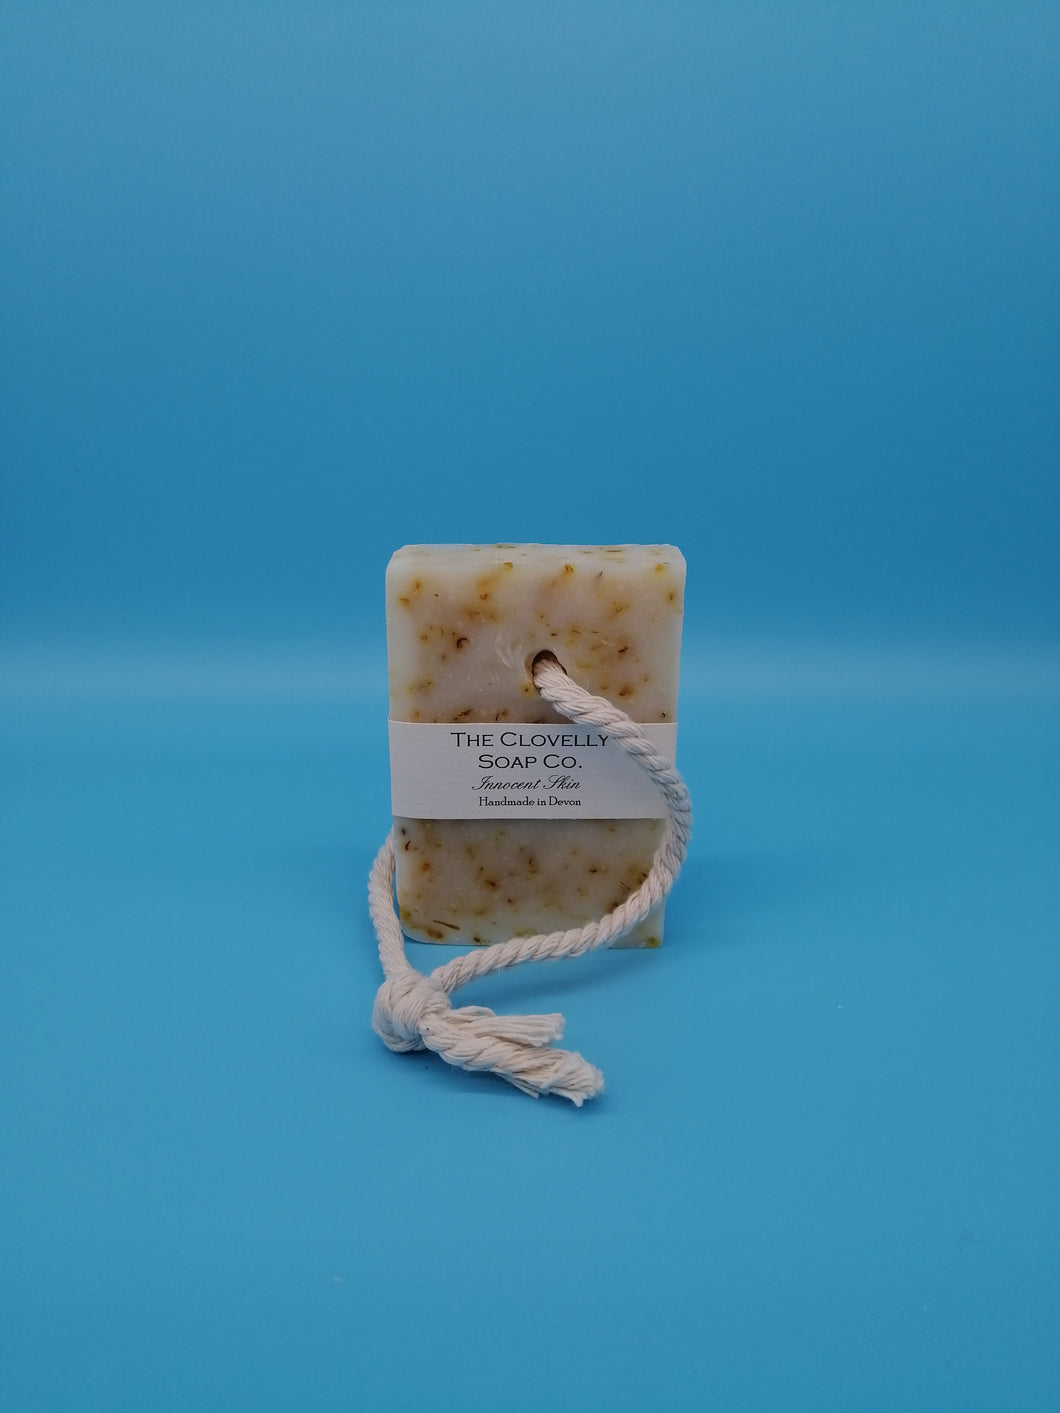 Innocent Skin Soap on a Rope